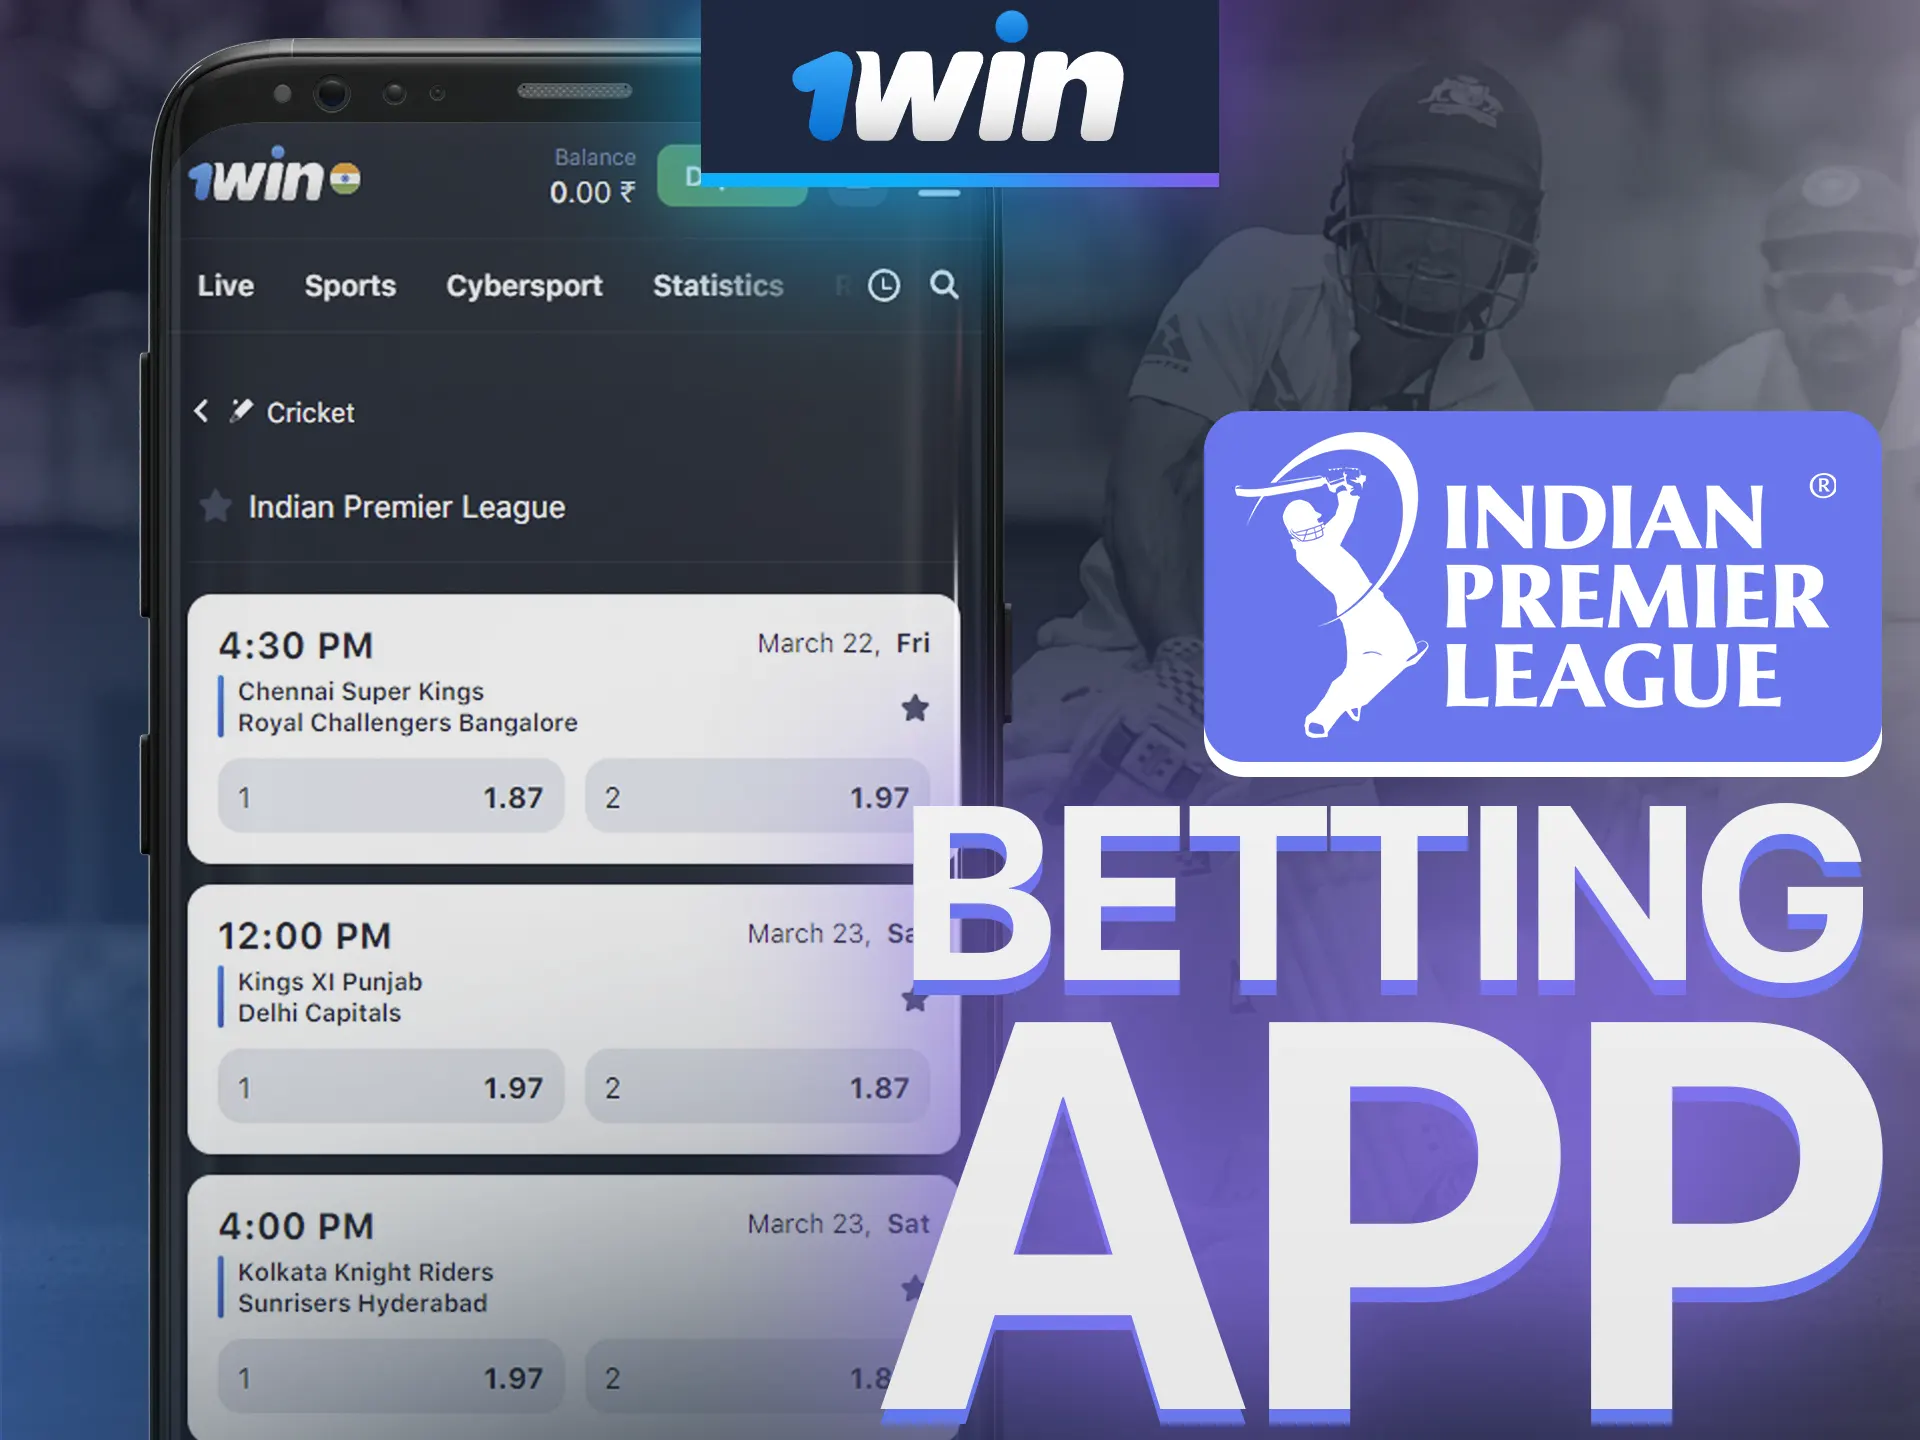 Bet on IPL conveniently with 1Win's mobile app.